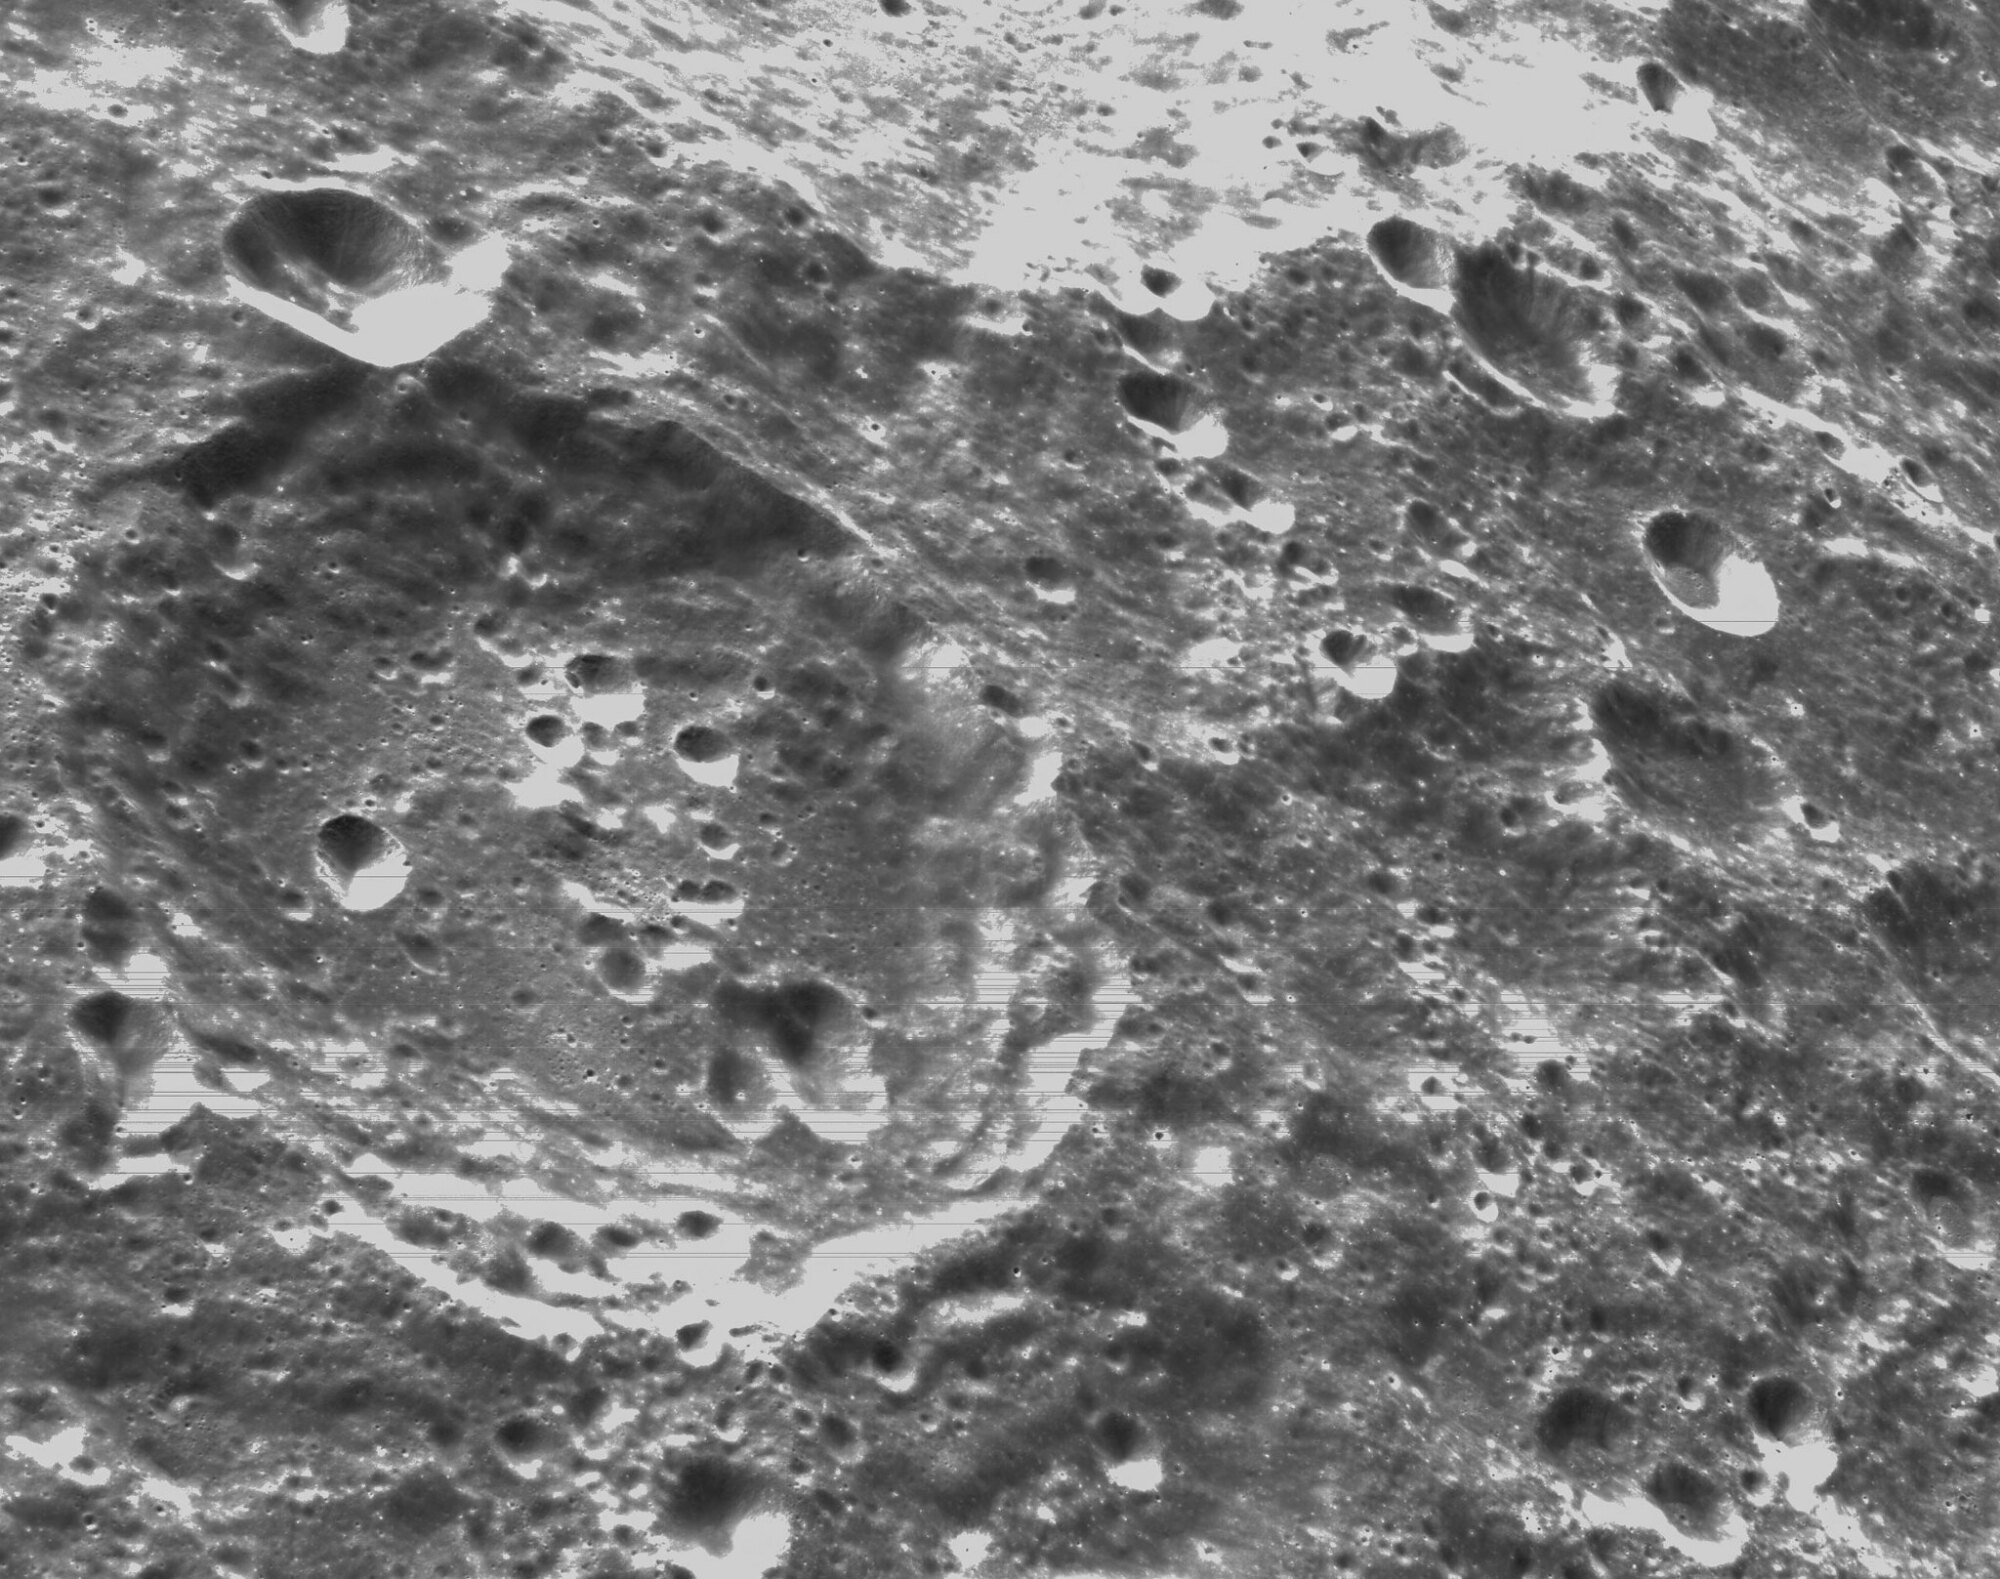 the moon's cratered surface